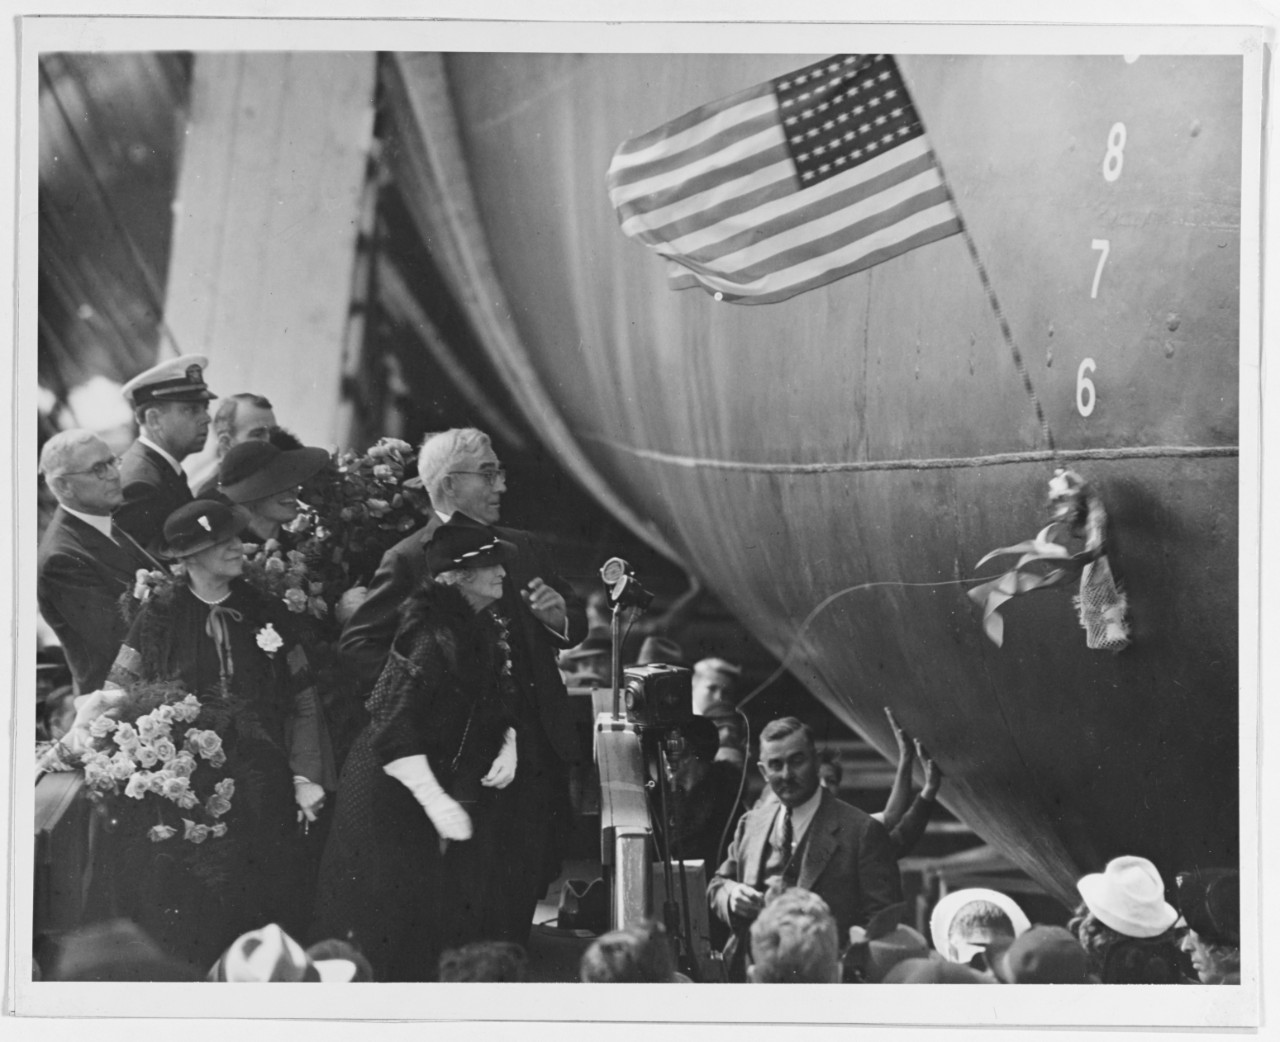 Mrs. Lulie H. Swanson, Enterprise sponsor, christens the ship at Newport News Shipbuilding & Drydock Co., 3 October 1936. (Naval History and Heritage Command Photograph NH 54223)